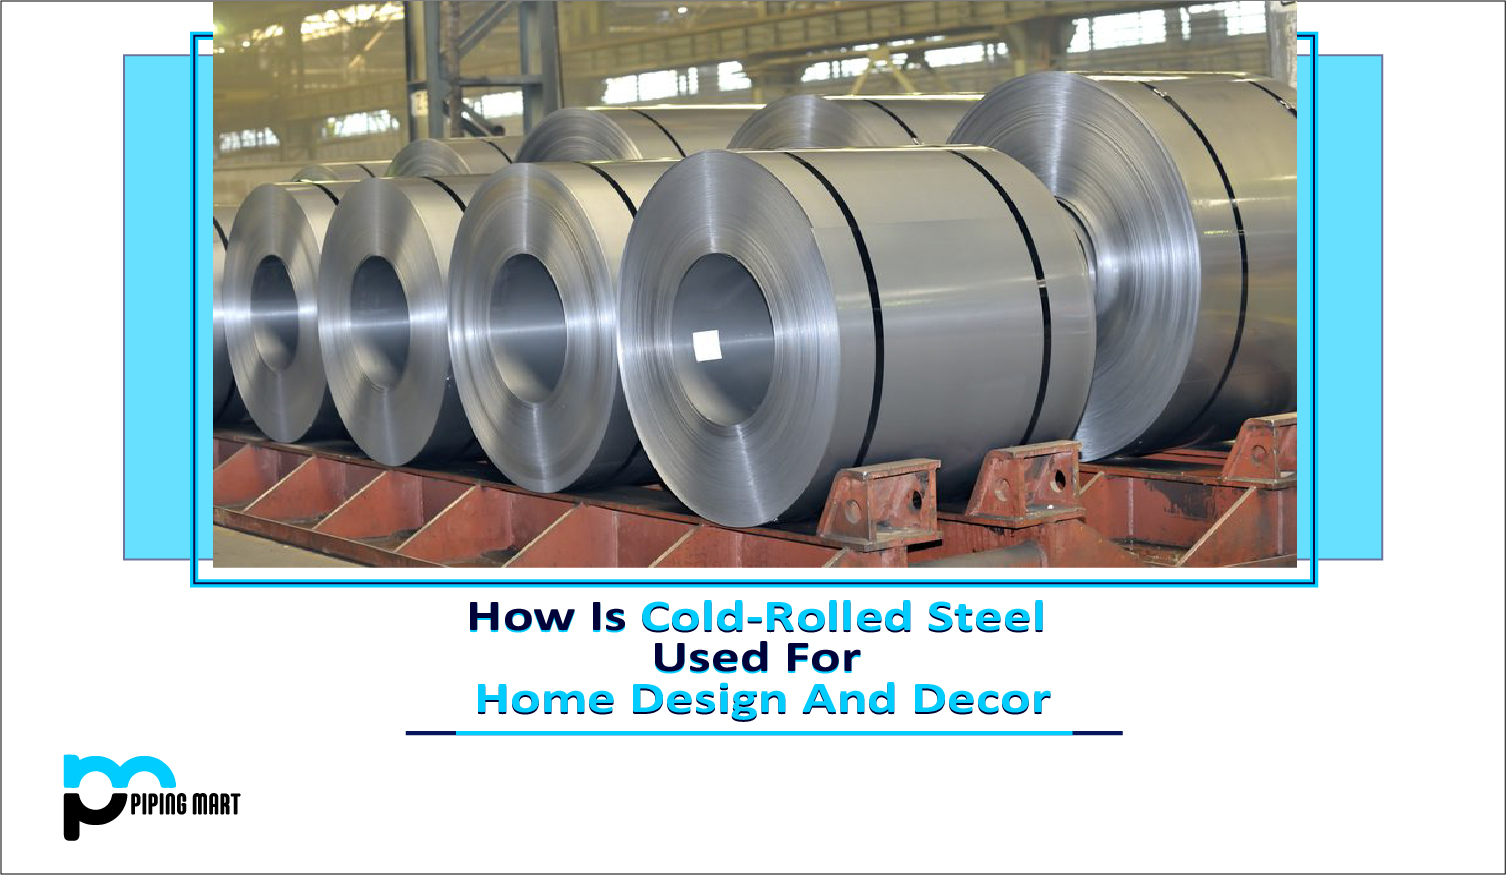 How is Cold-Rolled Steel used for Home Design and Décor